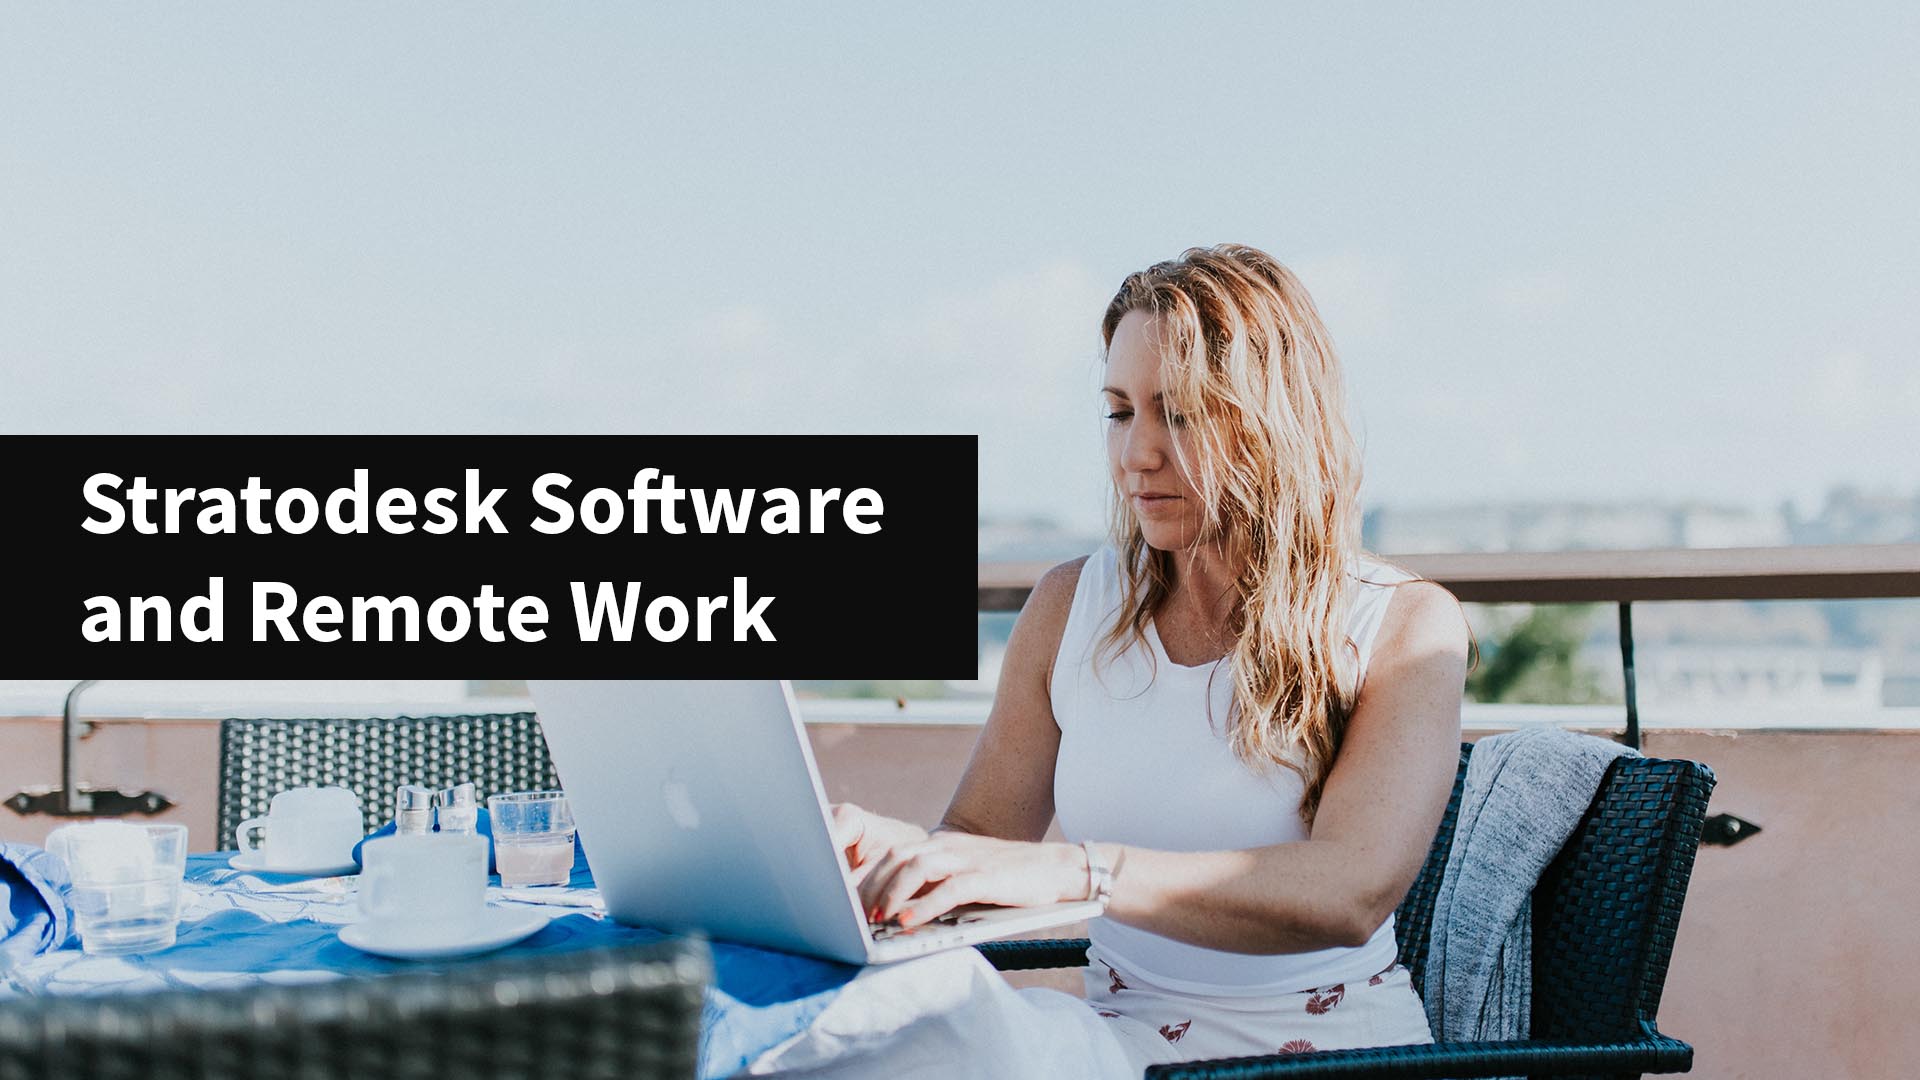 Stratodesk software and Remote Work